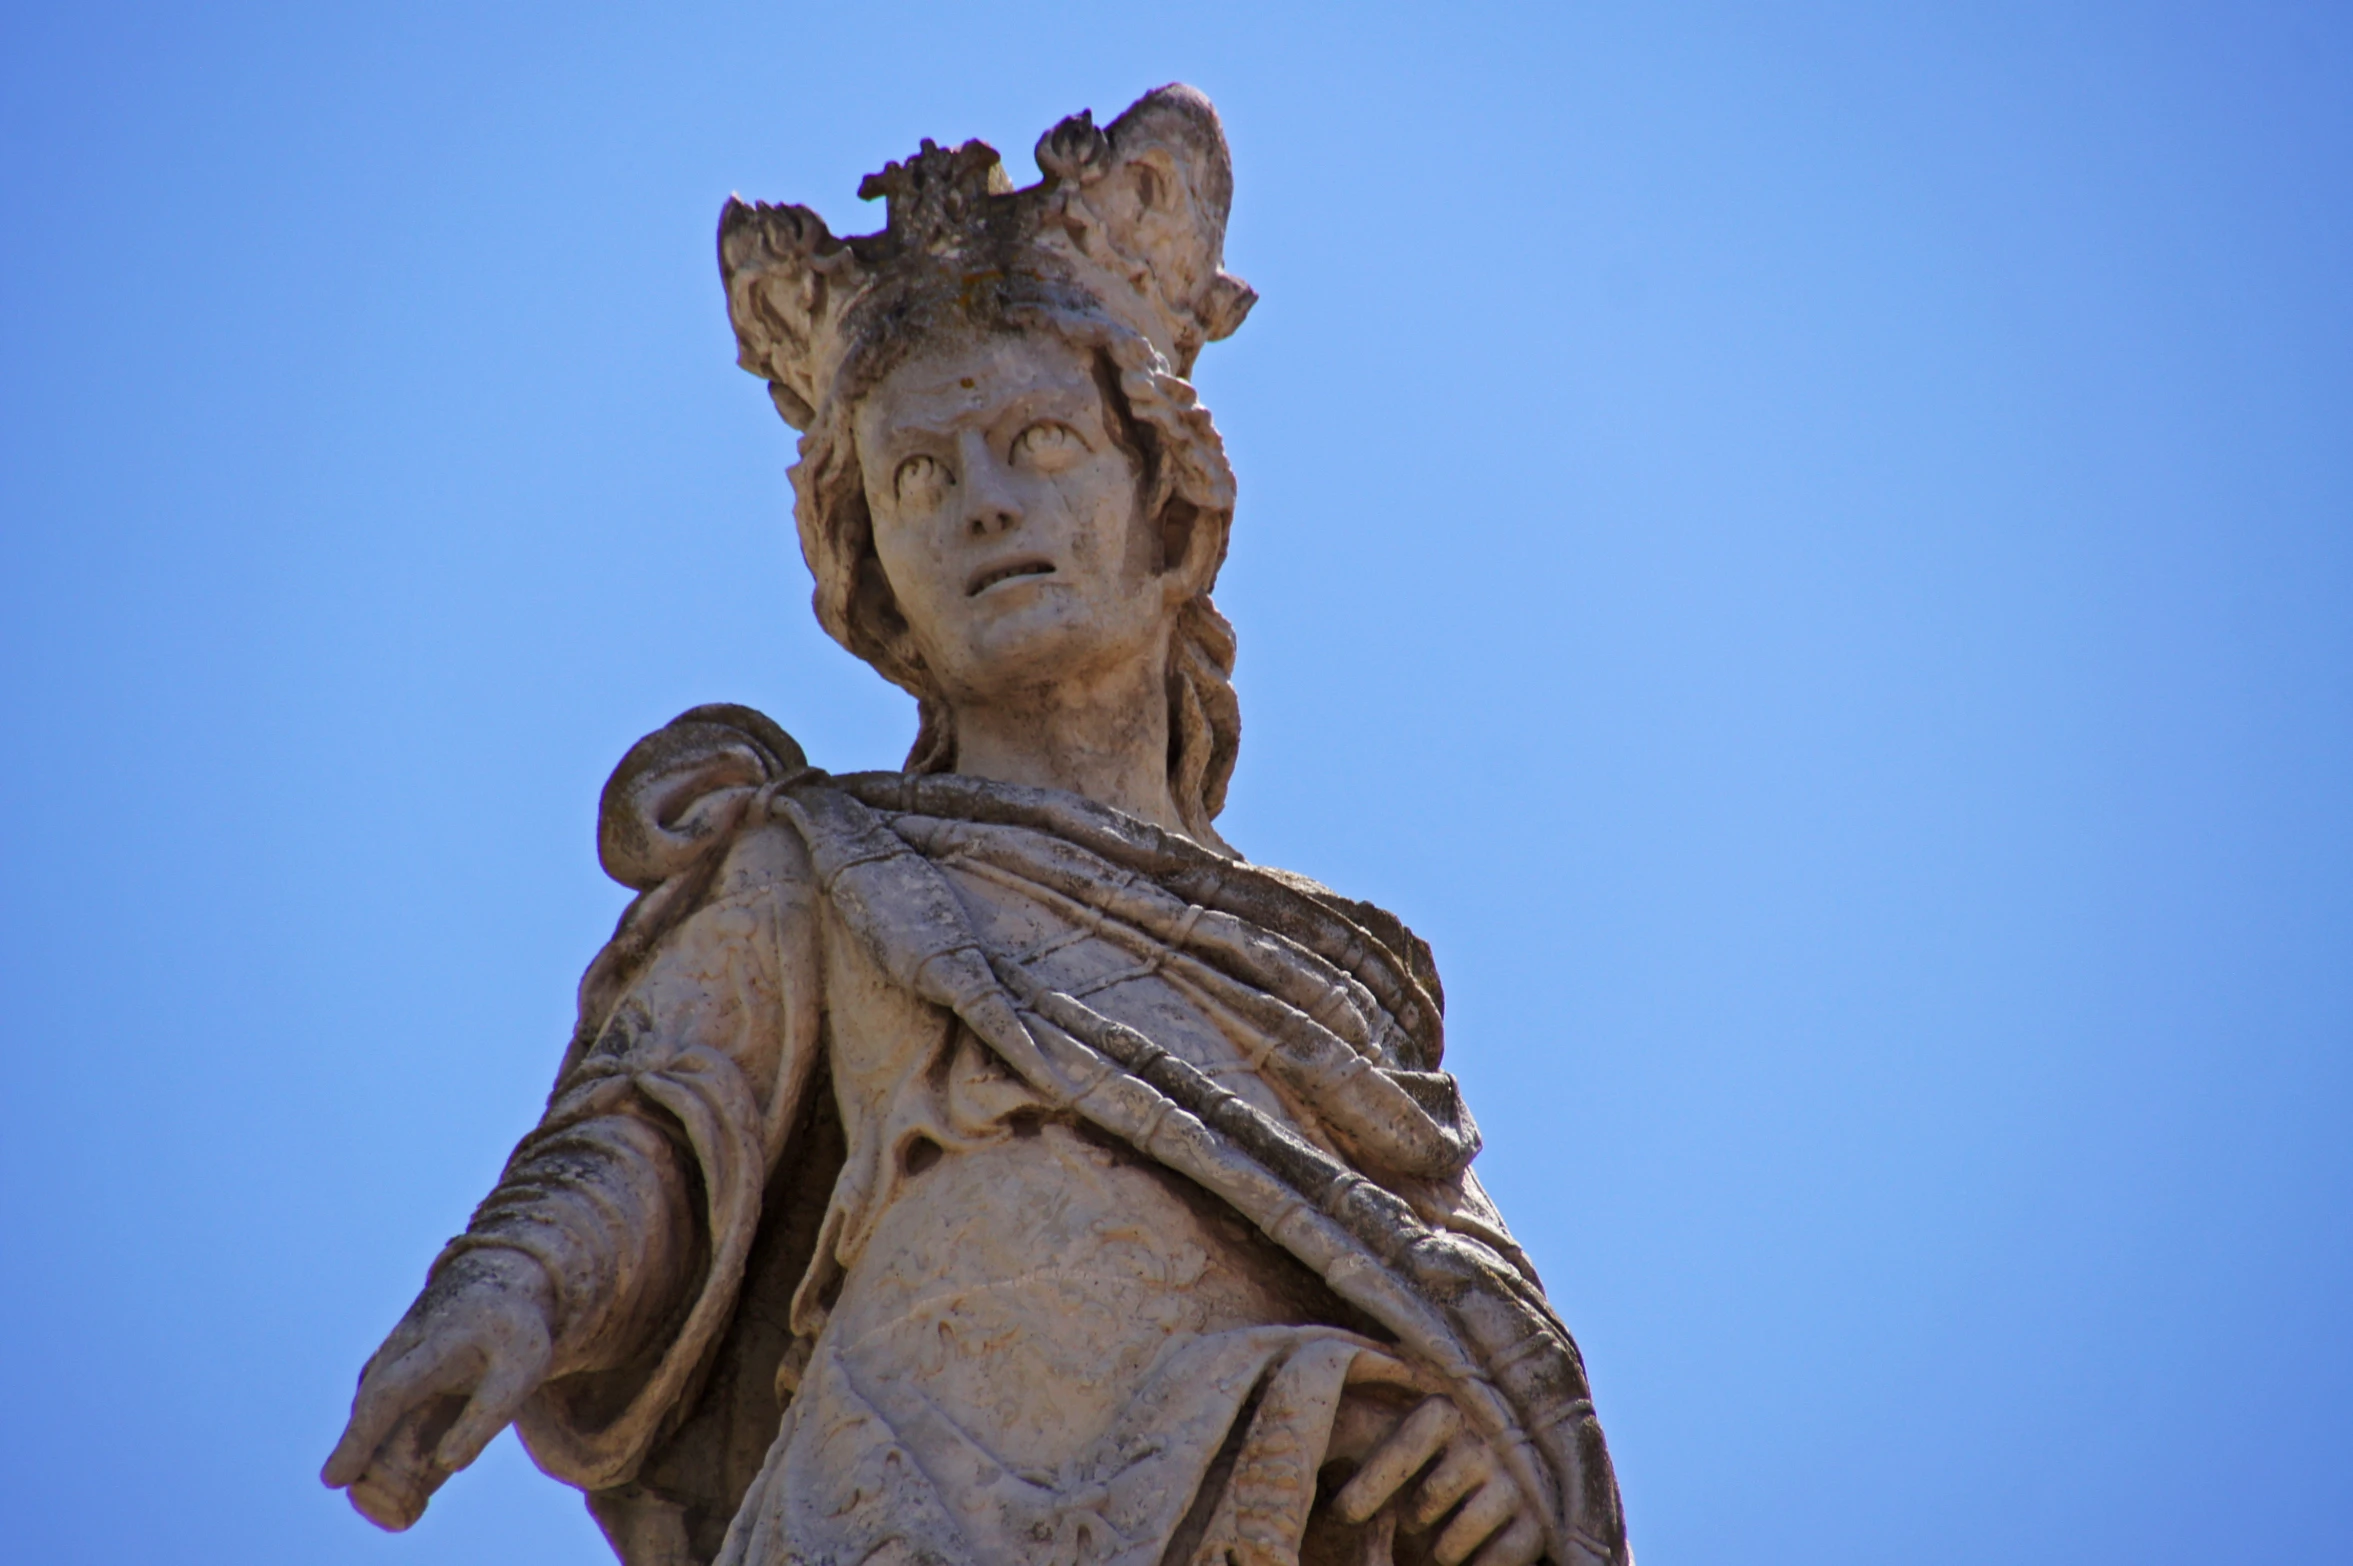 an ancient statue is shown against a blue sky